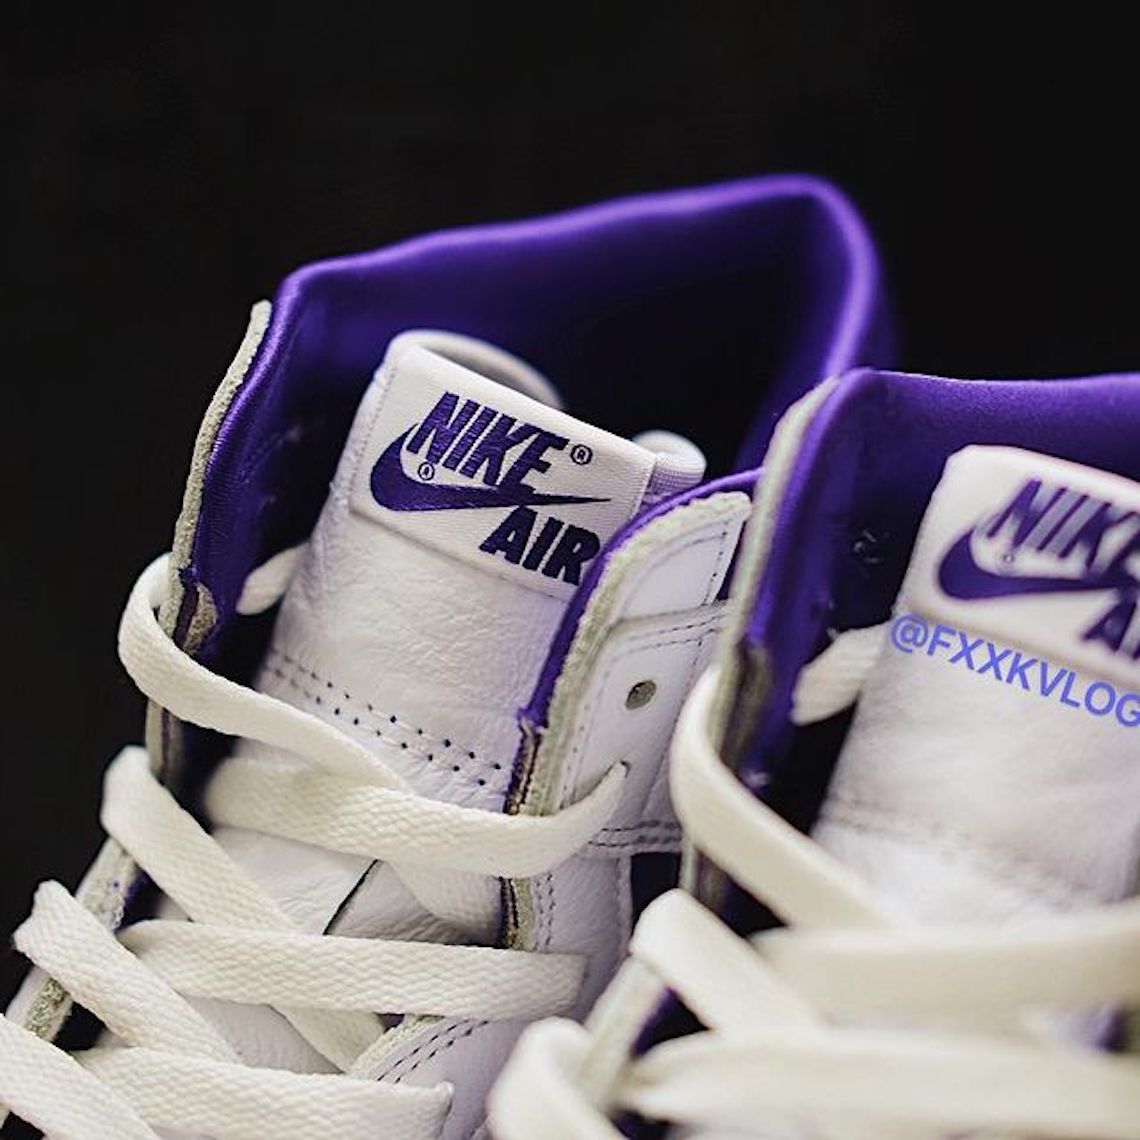 Synthetic leather strap with Jordan branding Retro High Og Wmns White Court Purple Cd0461 151 18